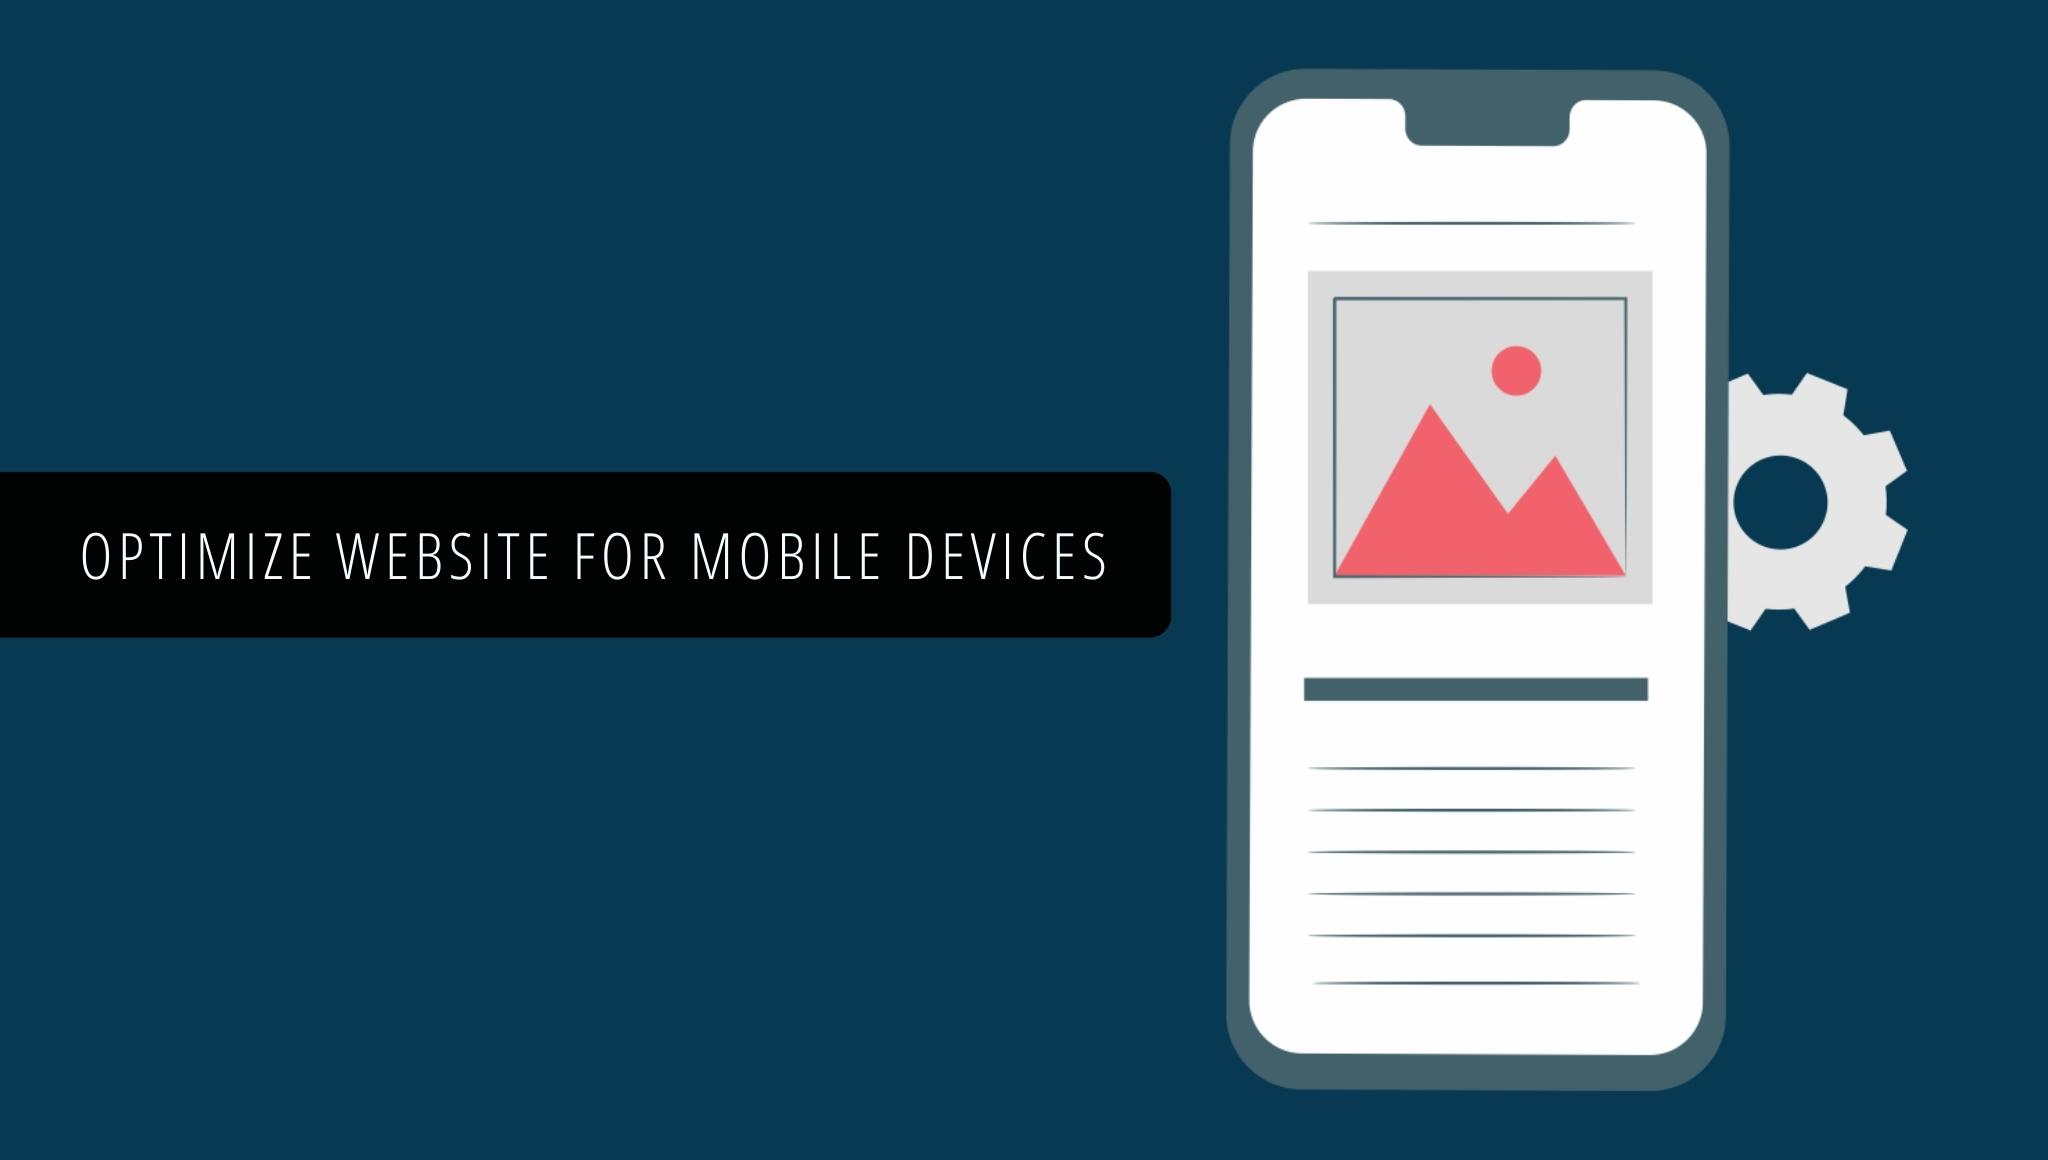 Optimize your website for mobile devices